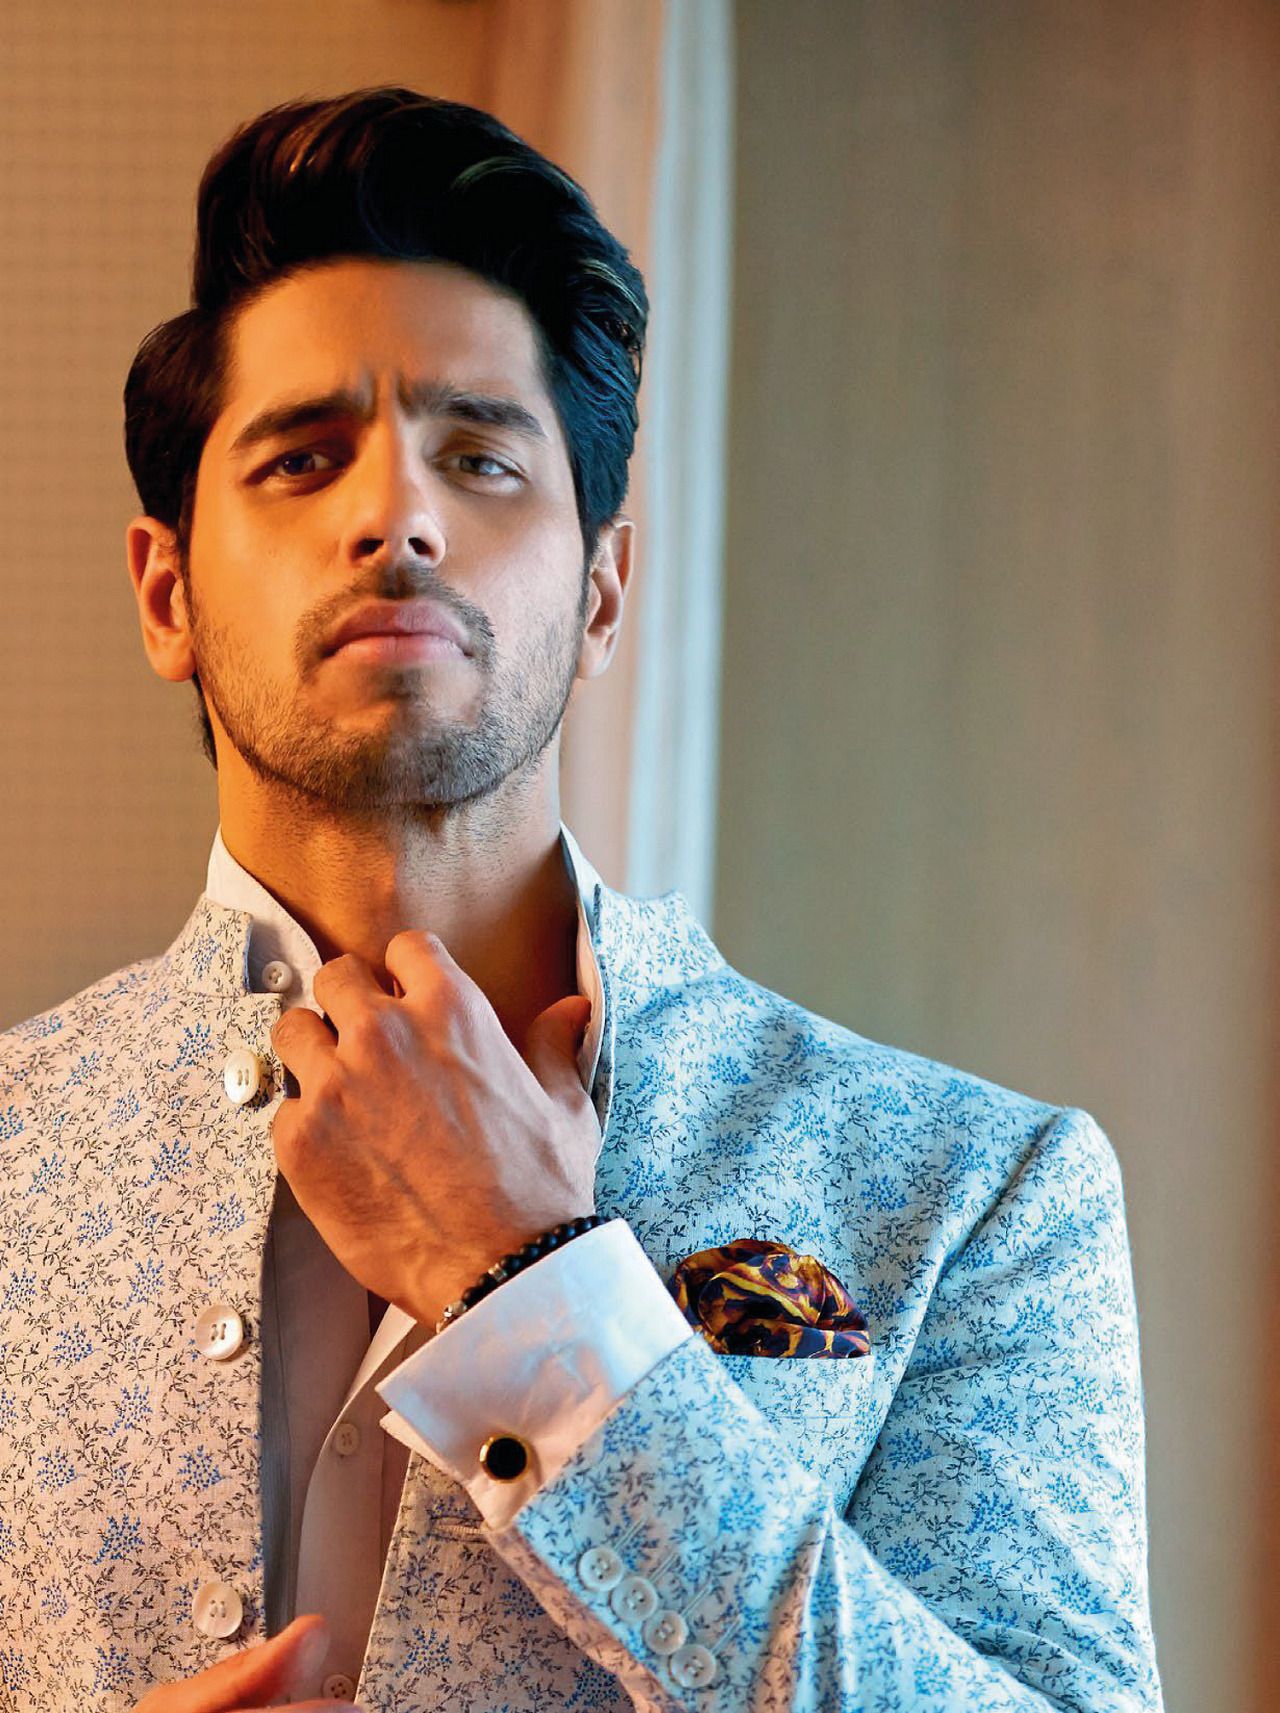 Grooming notes: 6 best hairstyles for men we found in Bollywood movies